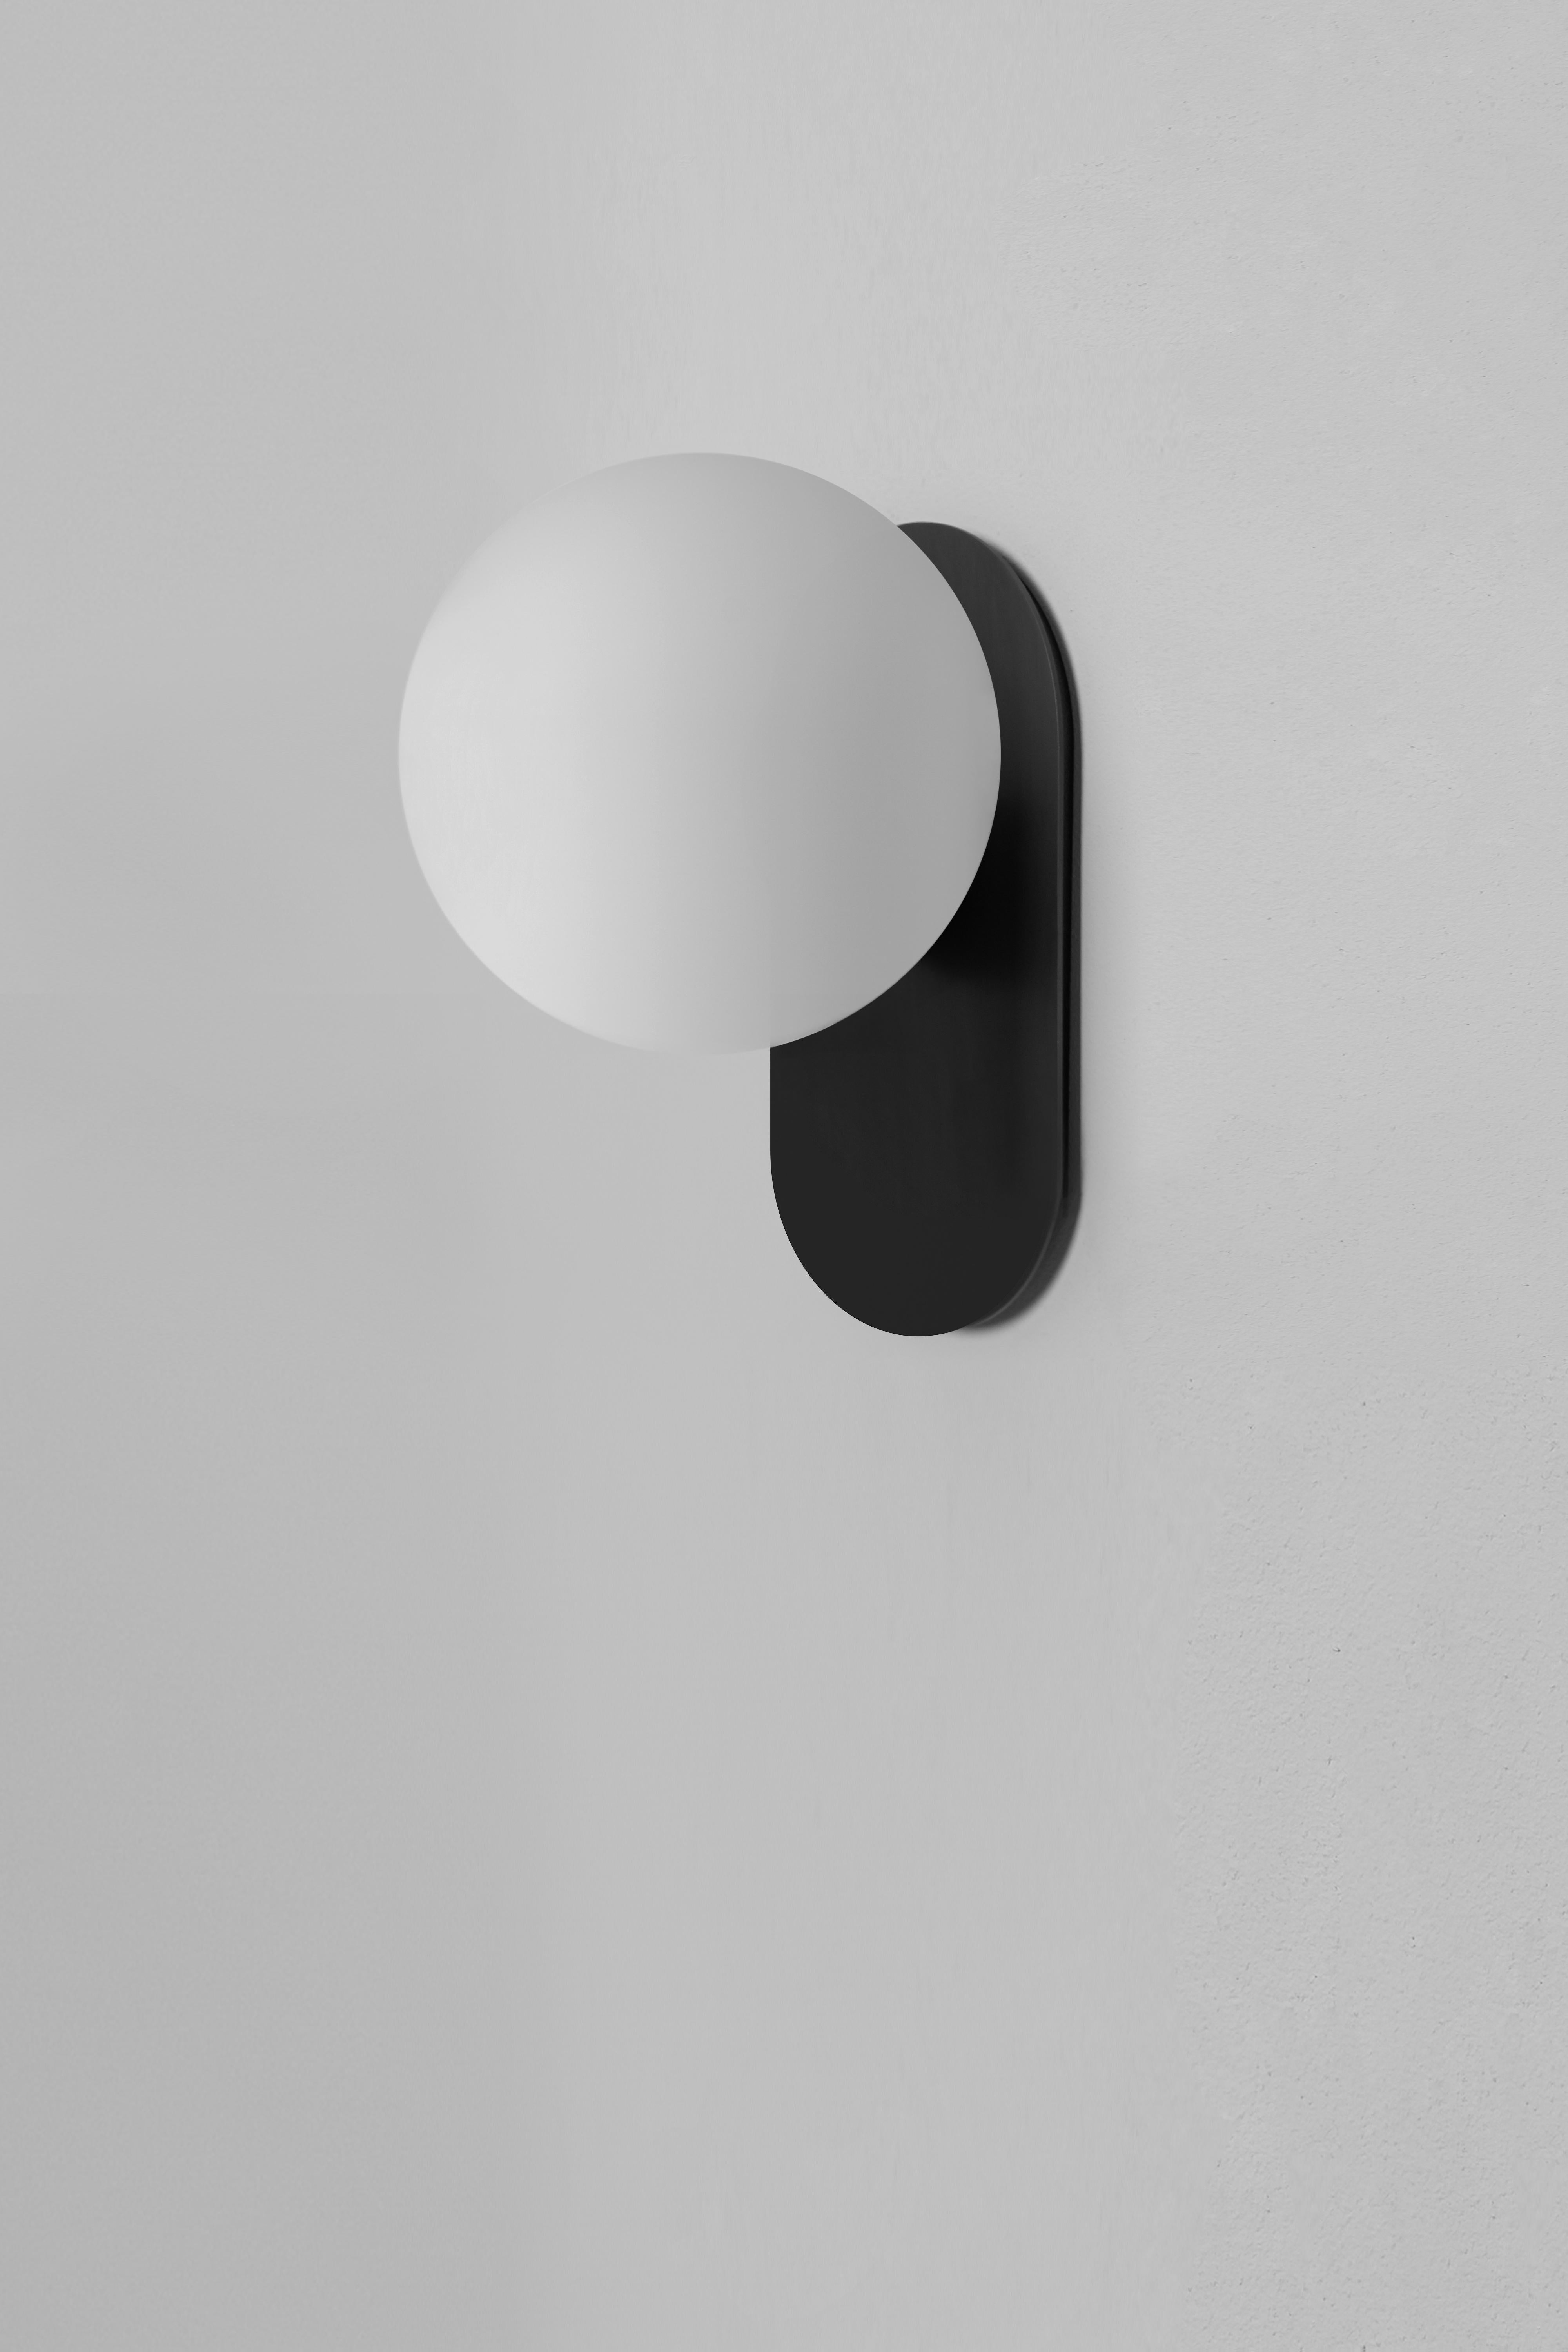 Polish Adrion Wall Sconce Sm by Schwung For Sale